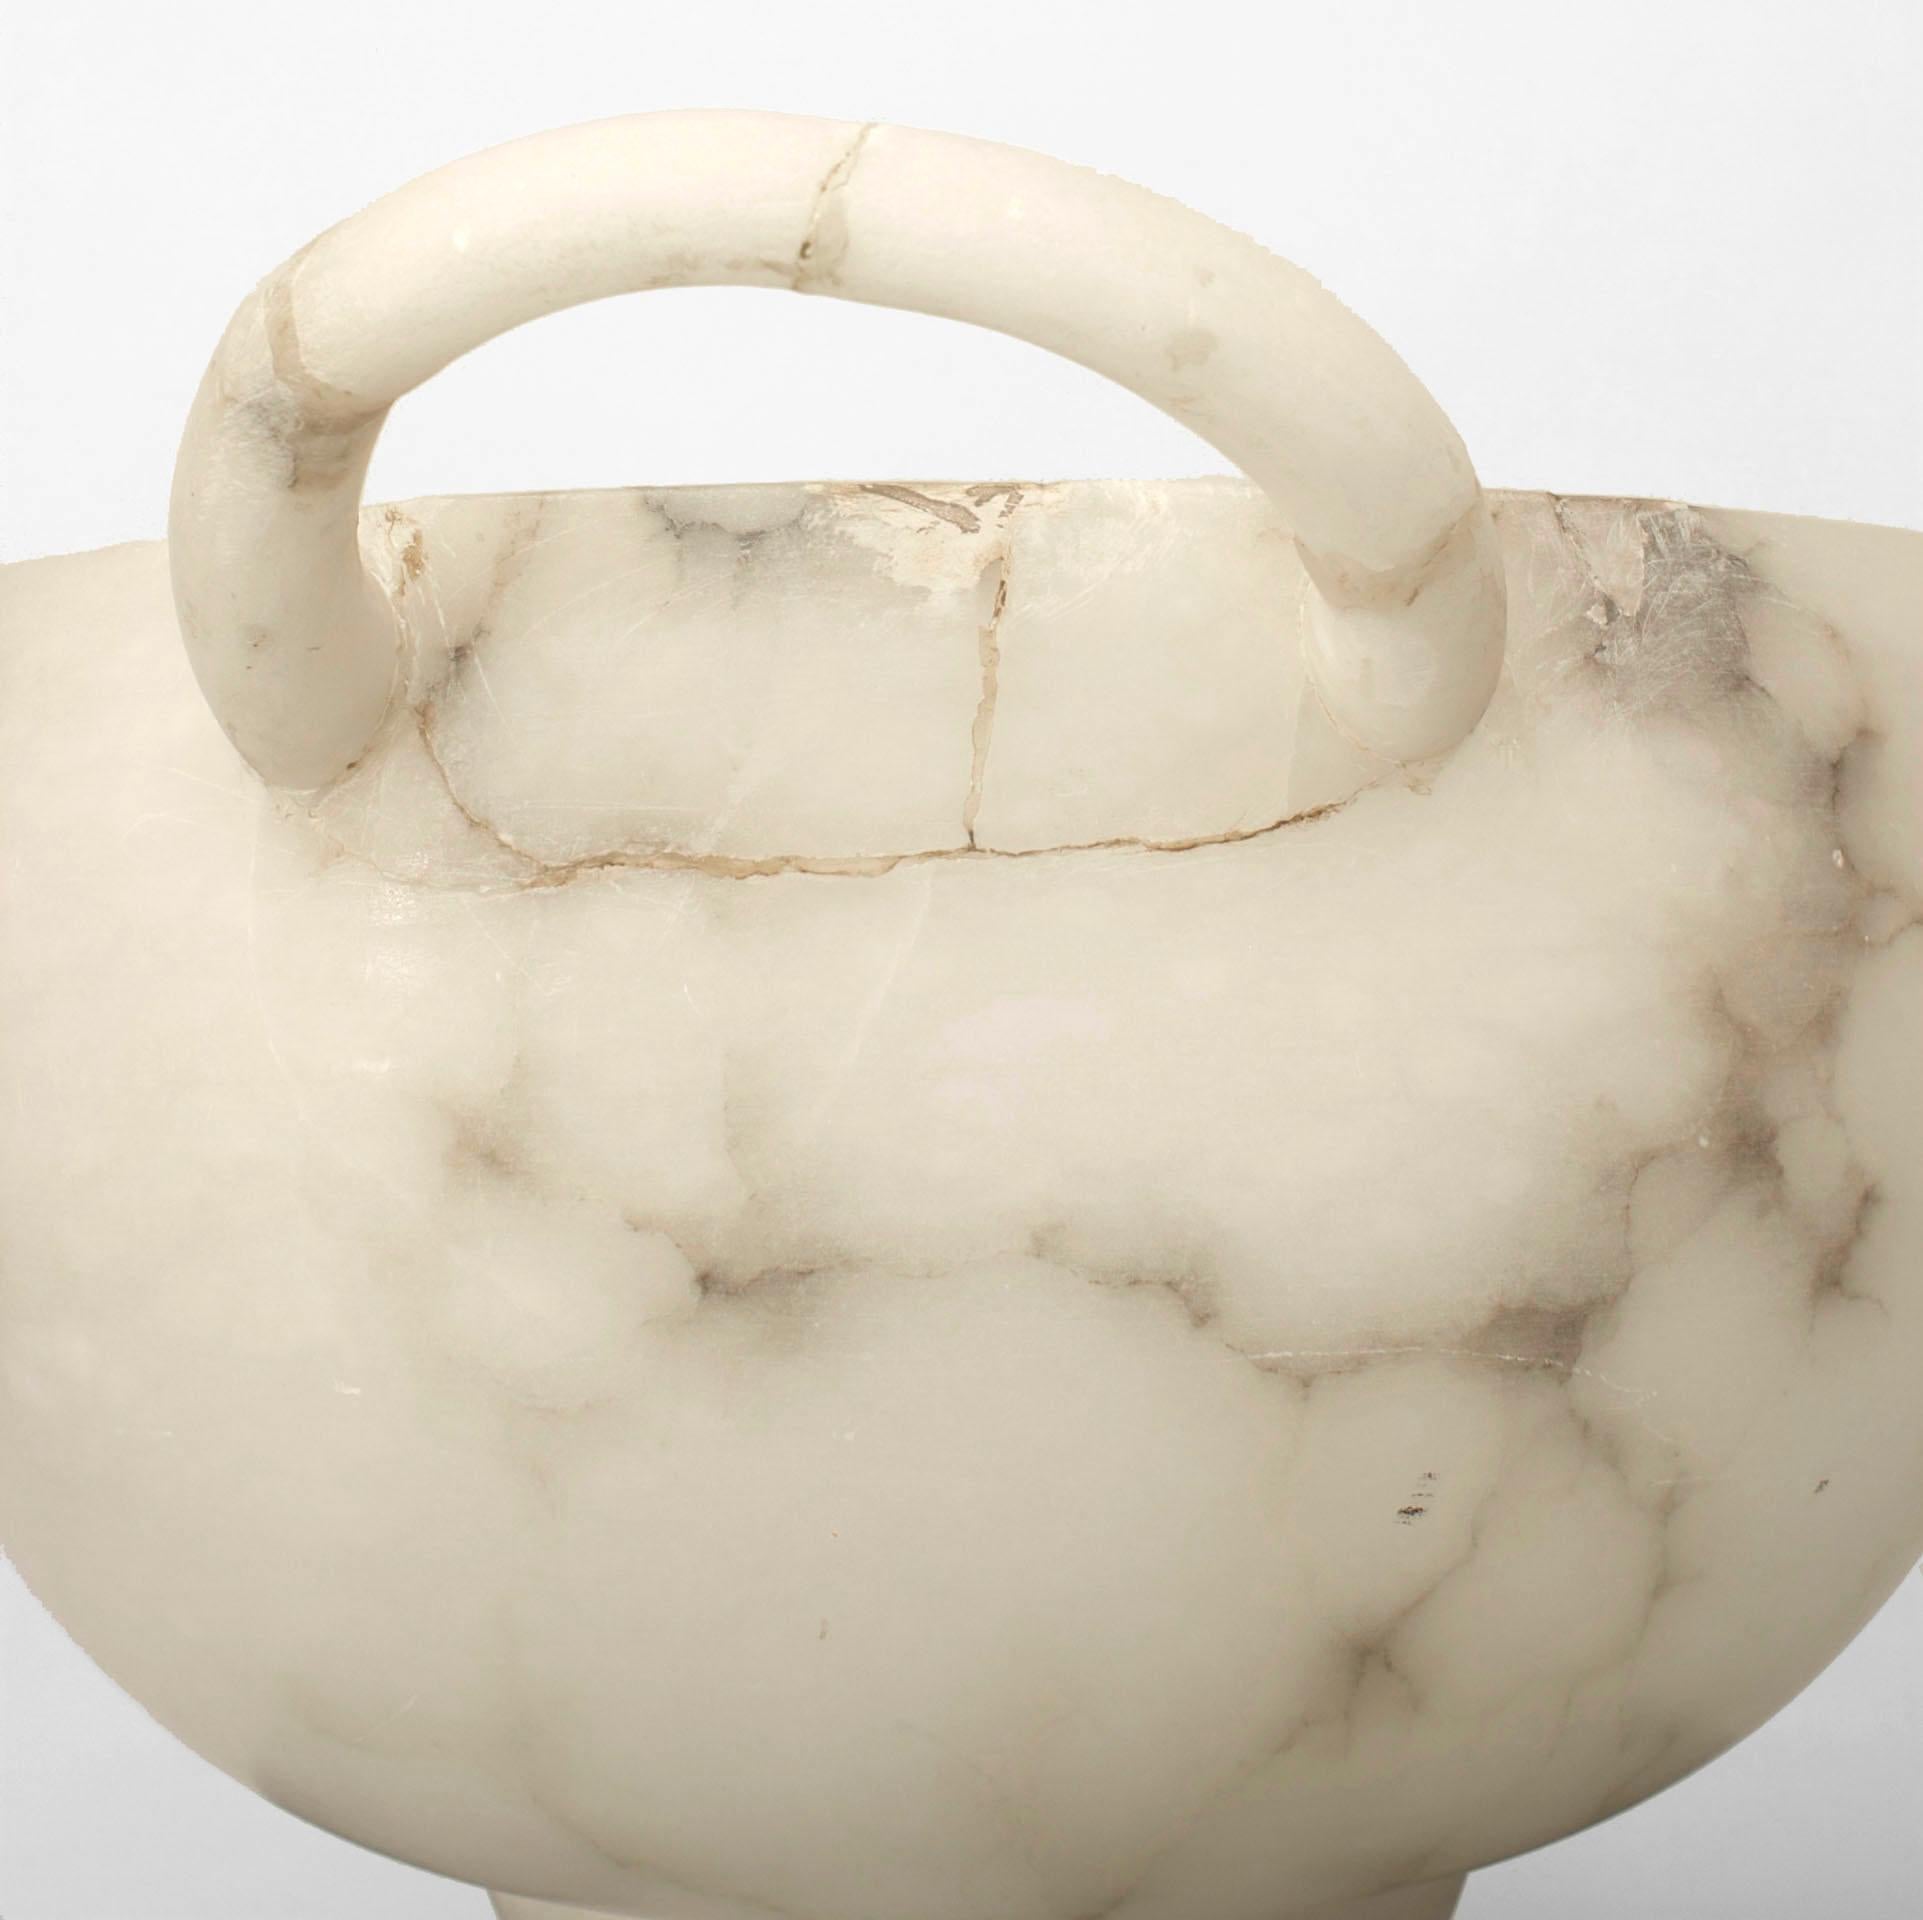 Italian mid-century (1940s) large alabaster round bowl (jardiniere) with handles supported on a solid conical shaped base.
   